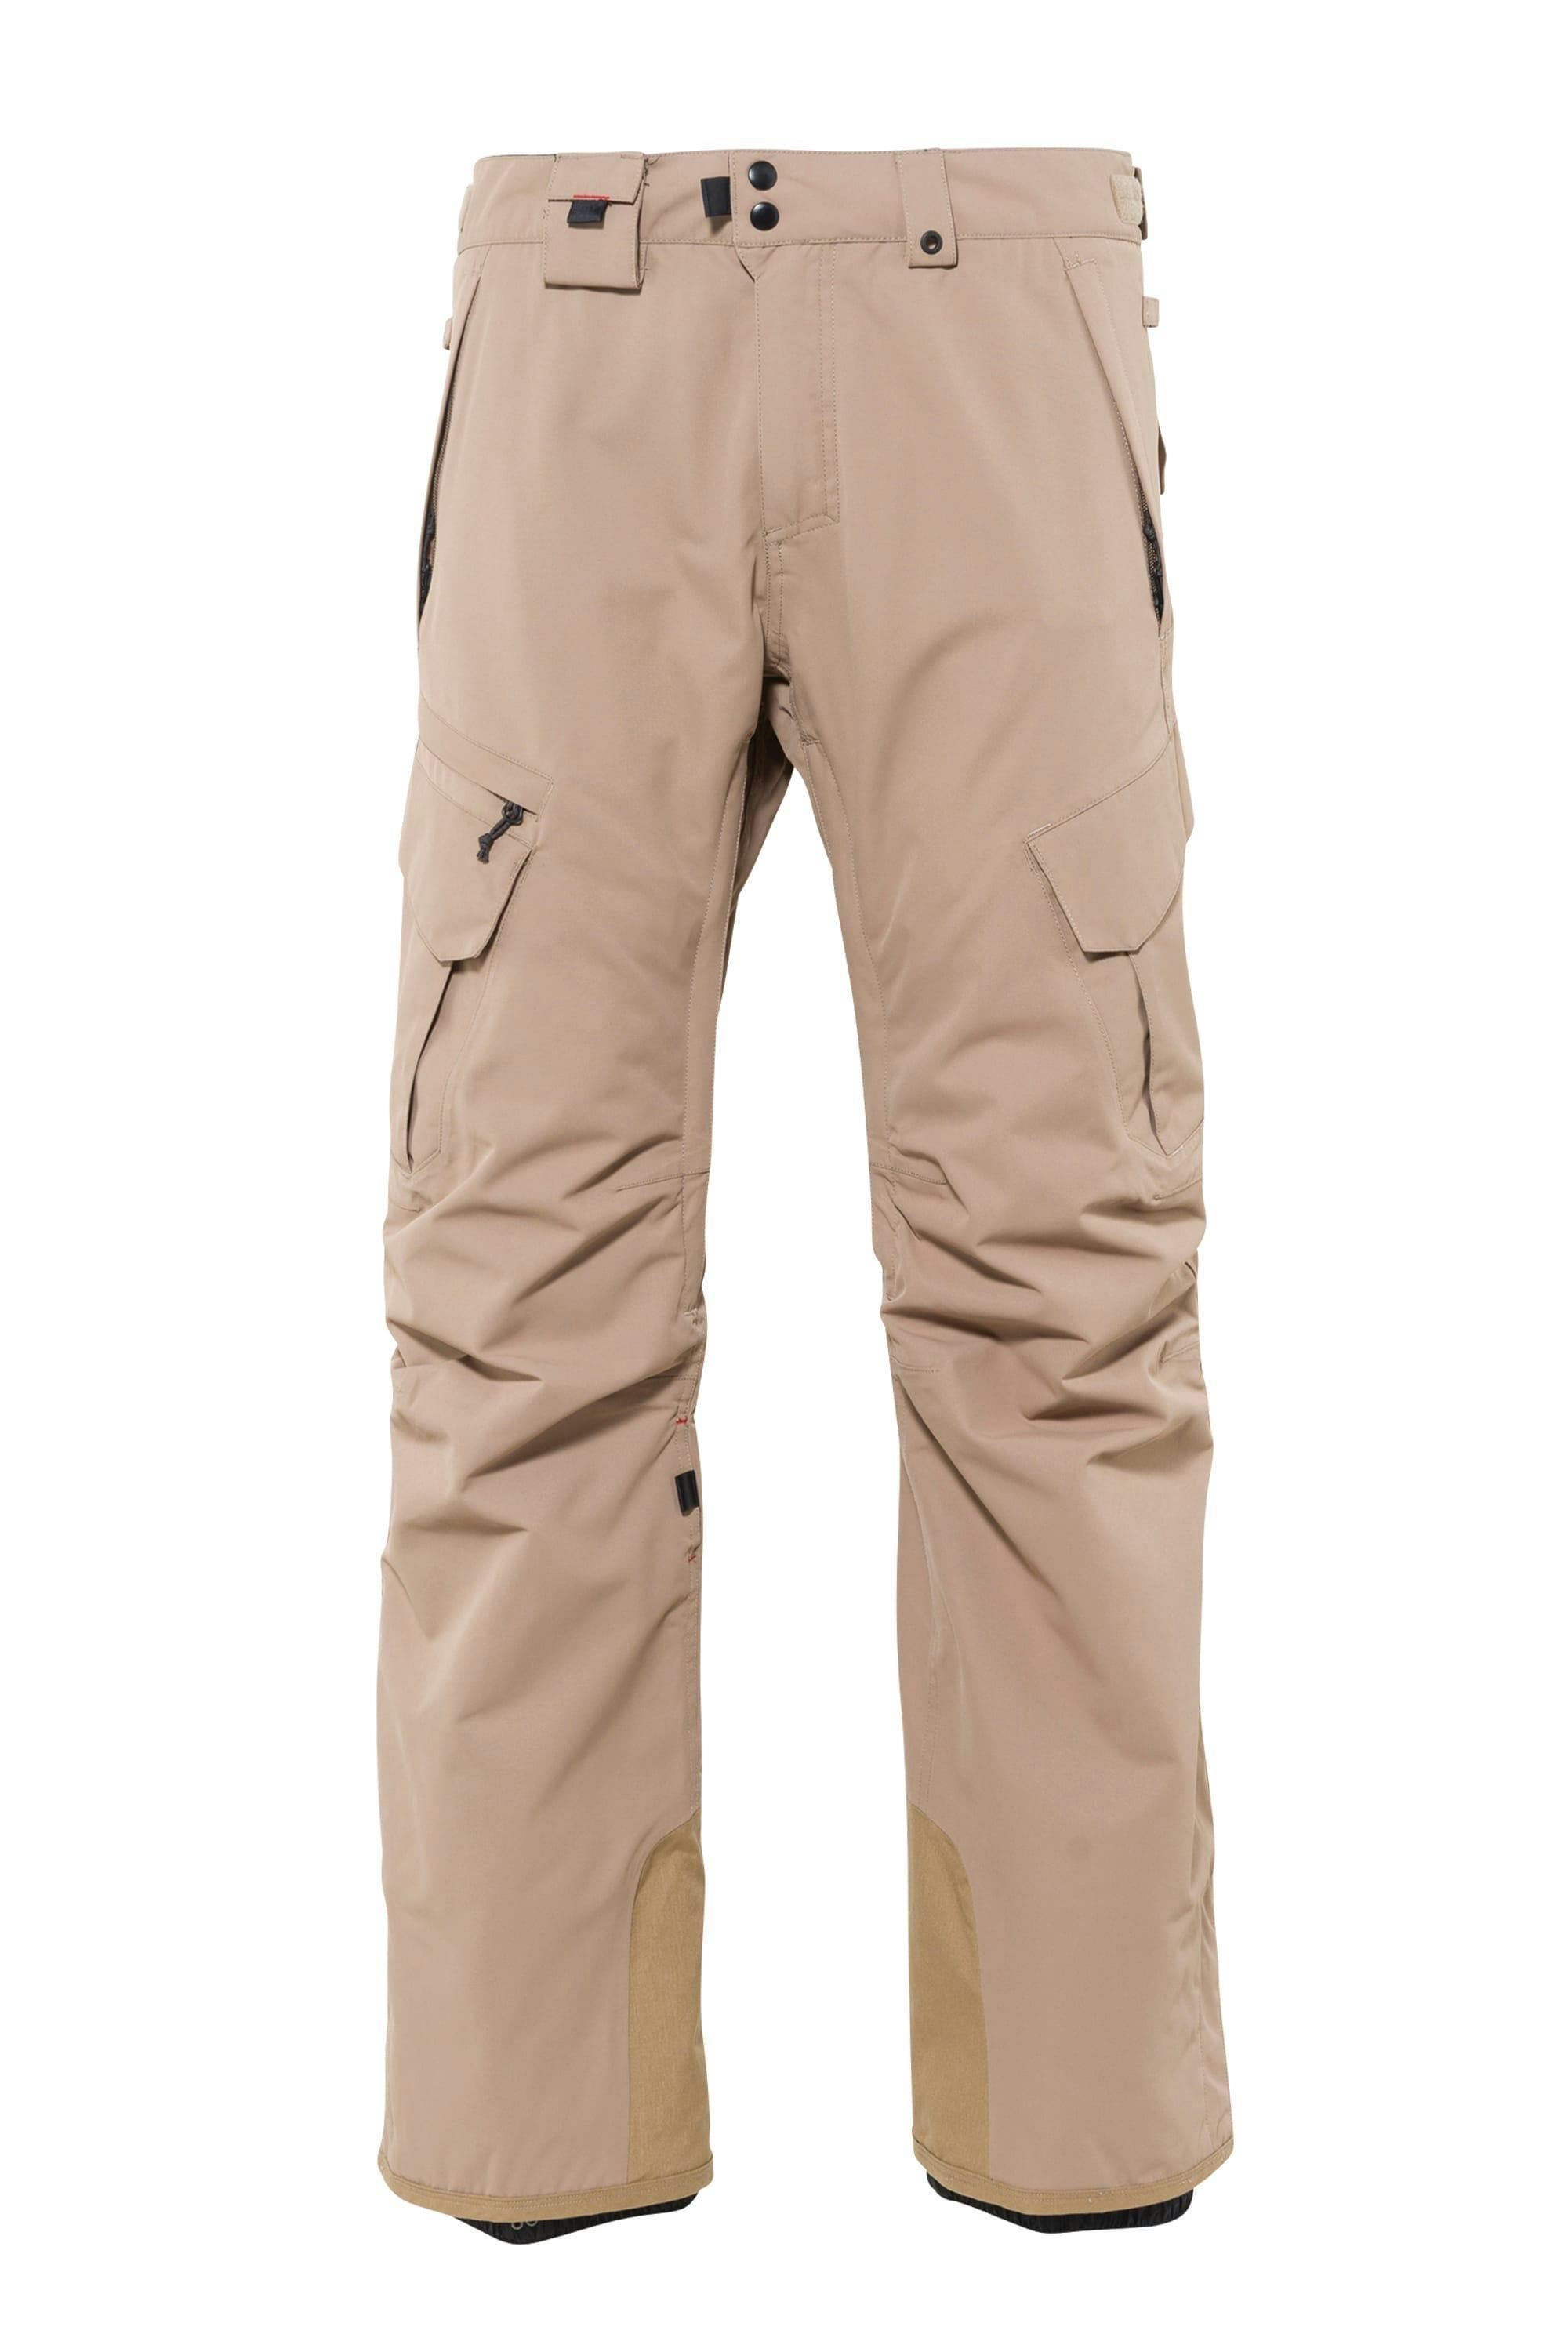 686 Men's SMARTY® 3-in-1 Cargo 2L Insulated Pants